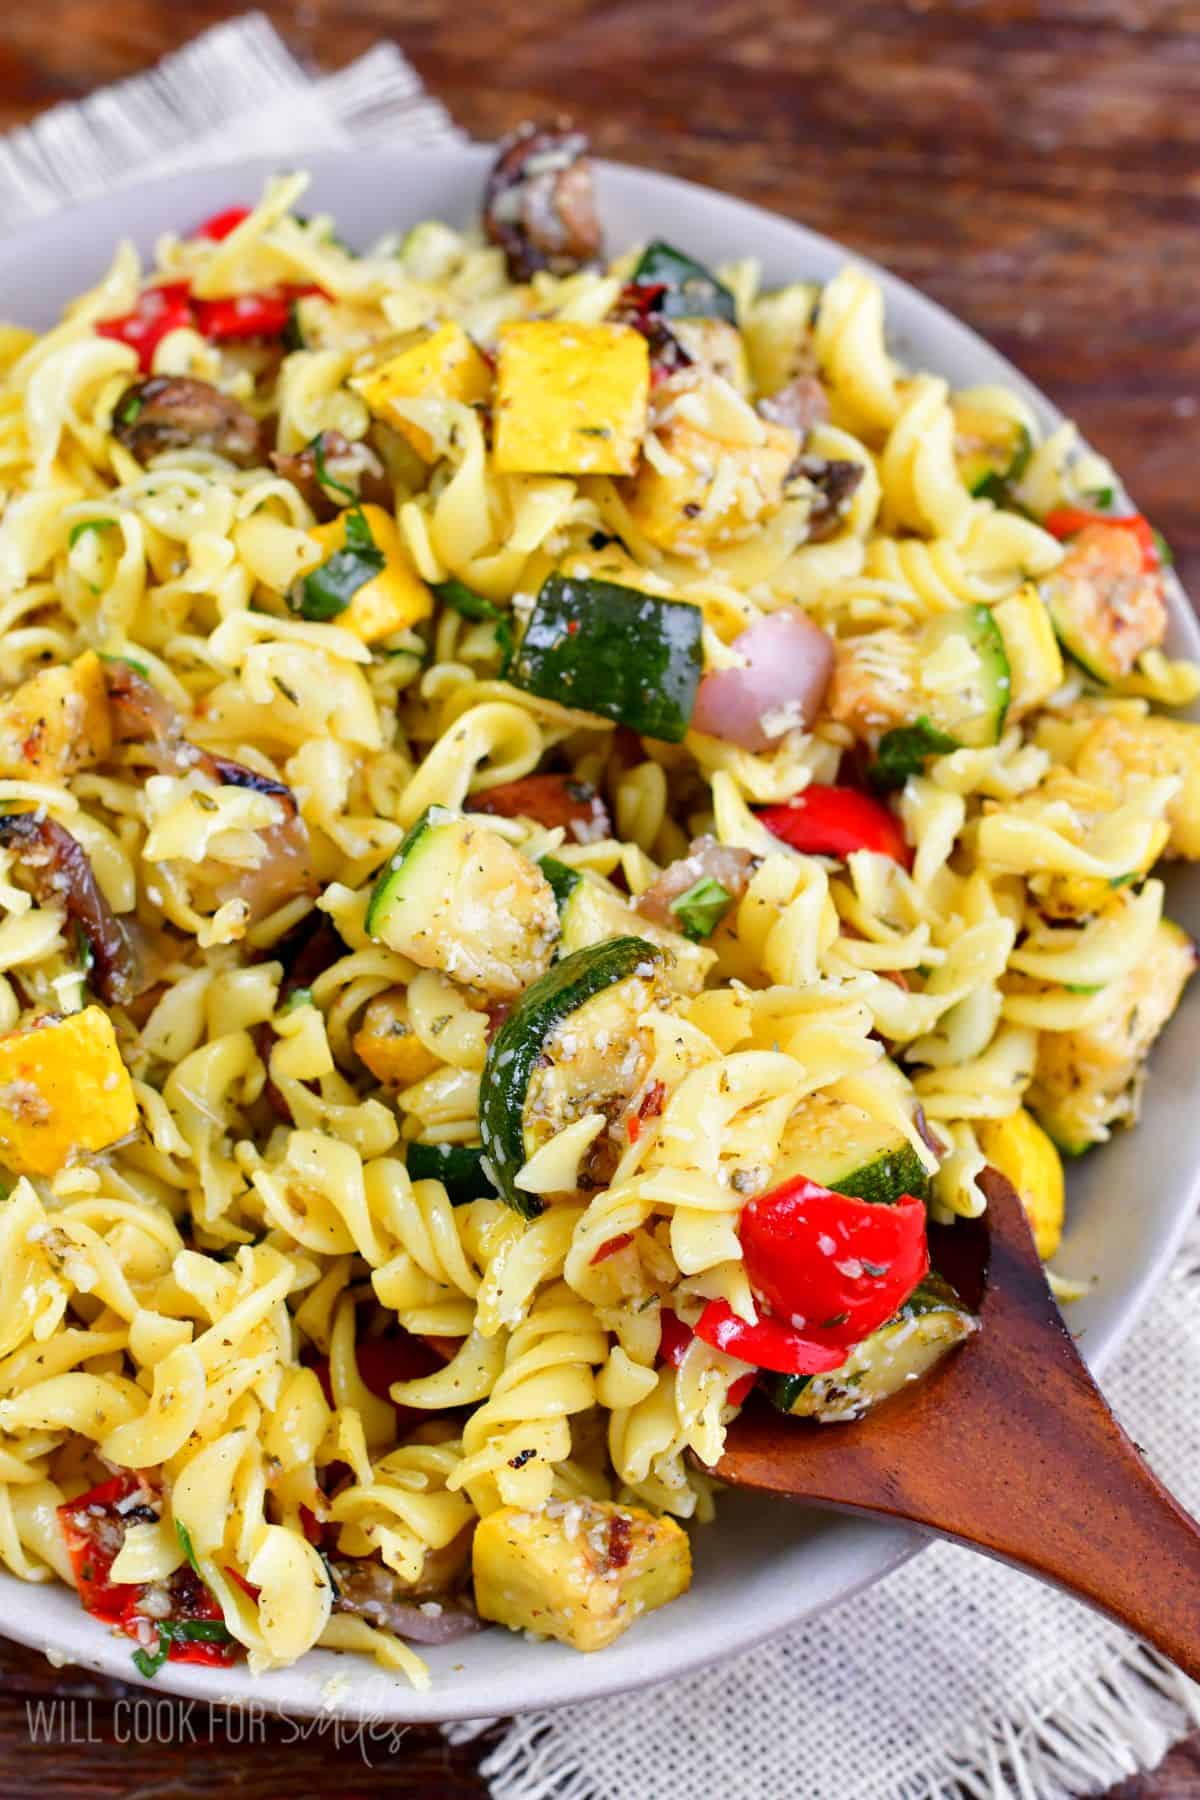 scooping up the Grilled Vegetable pasta salad with a big wooden spoon.